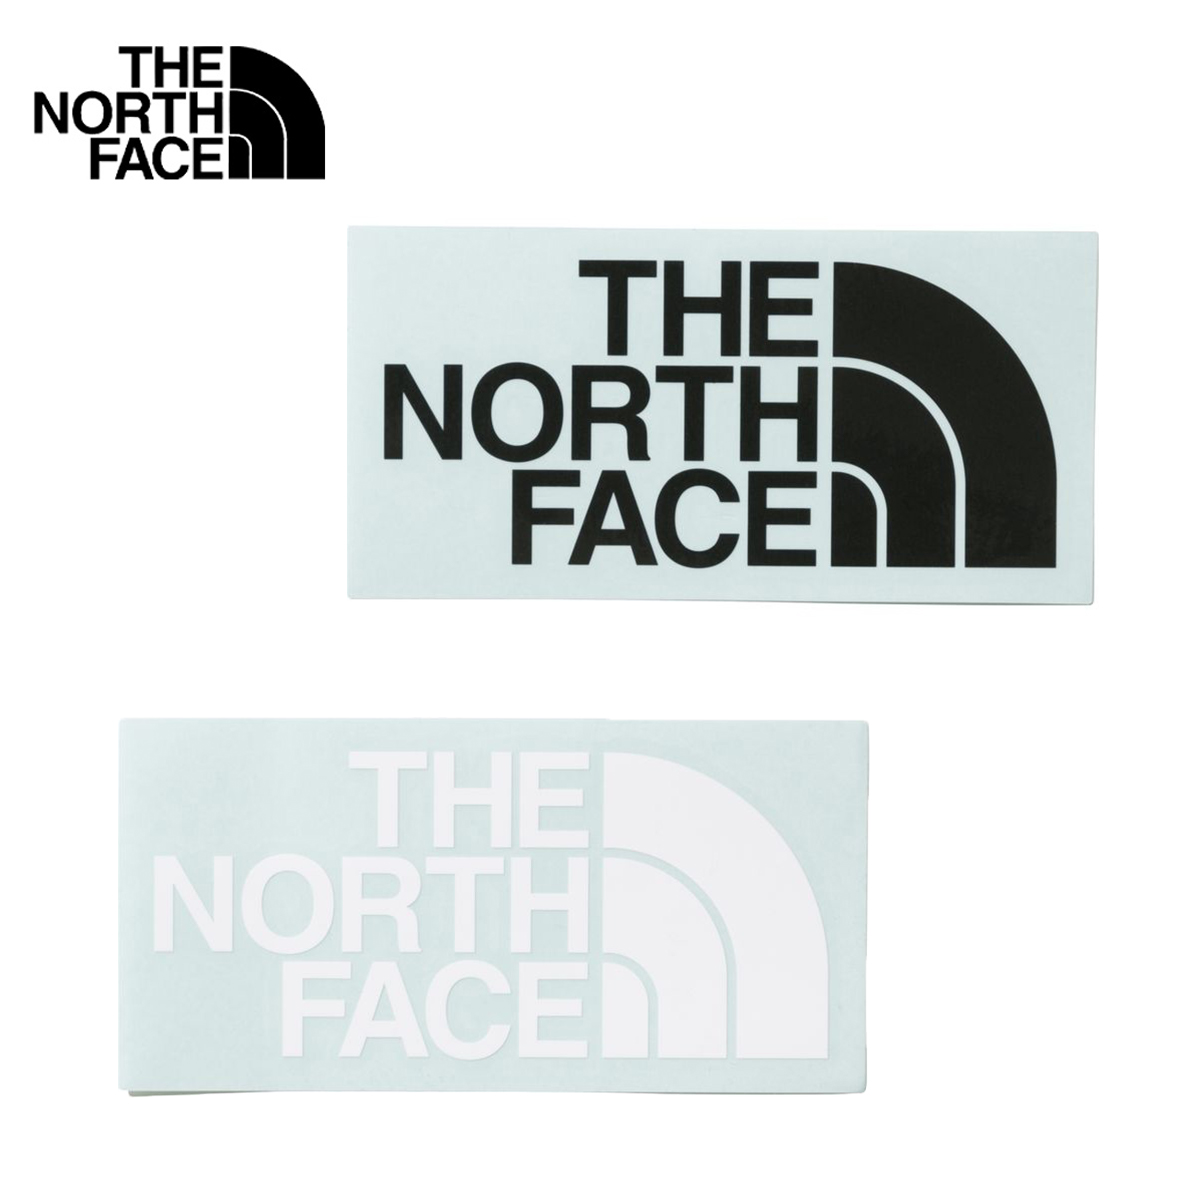  North Face sticker THE NORTH FACE TNF cutting sticker TNF Cutting Sticker Logo cutting sheet black white black white one Point 